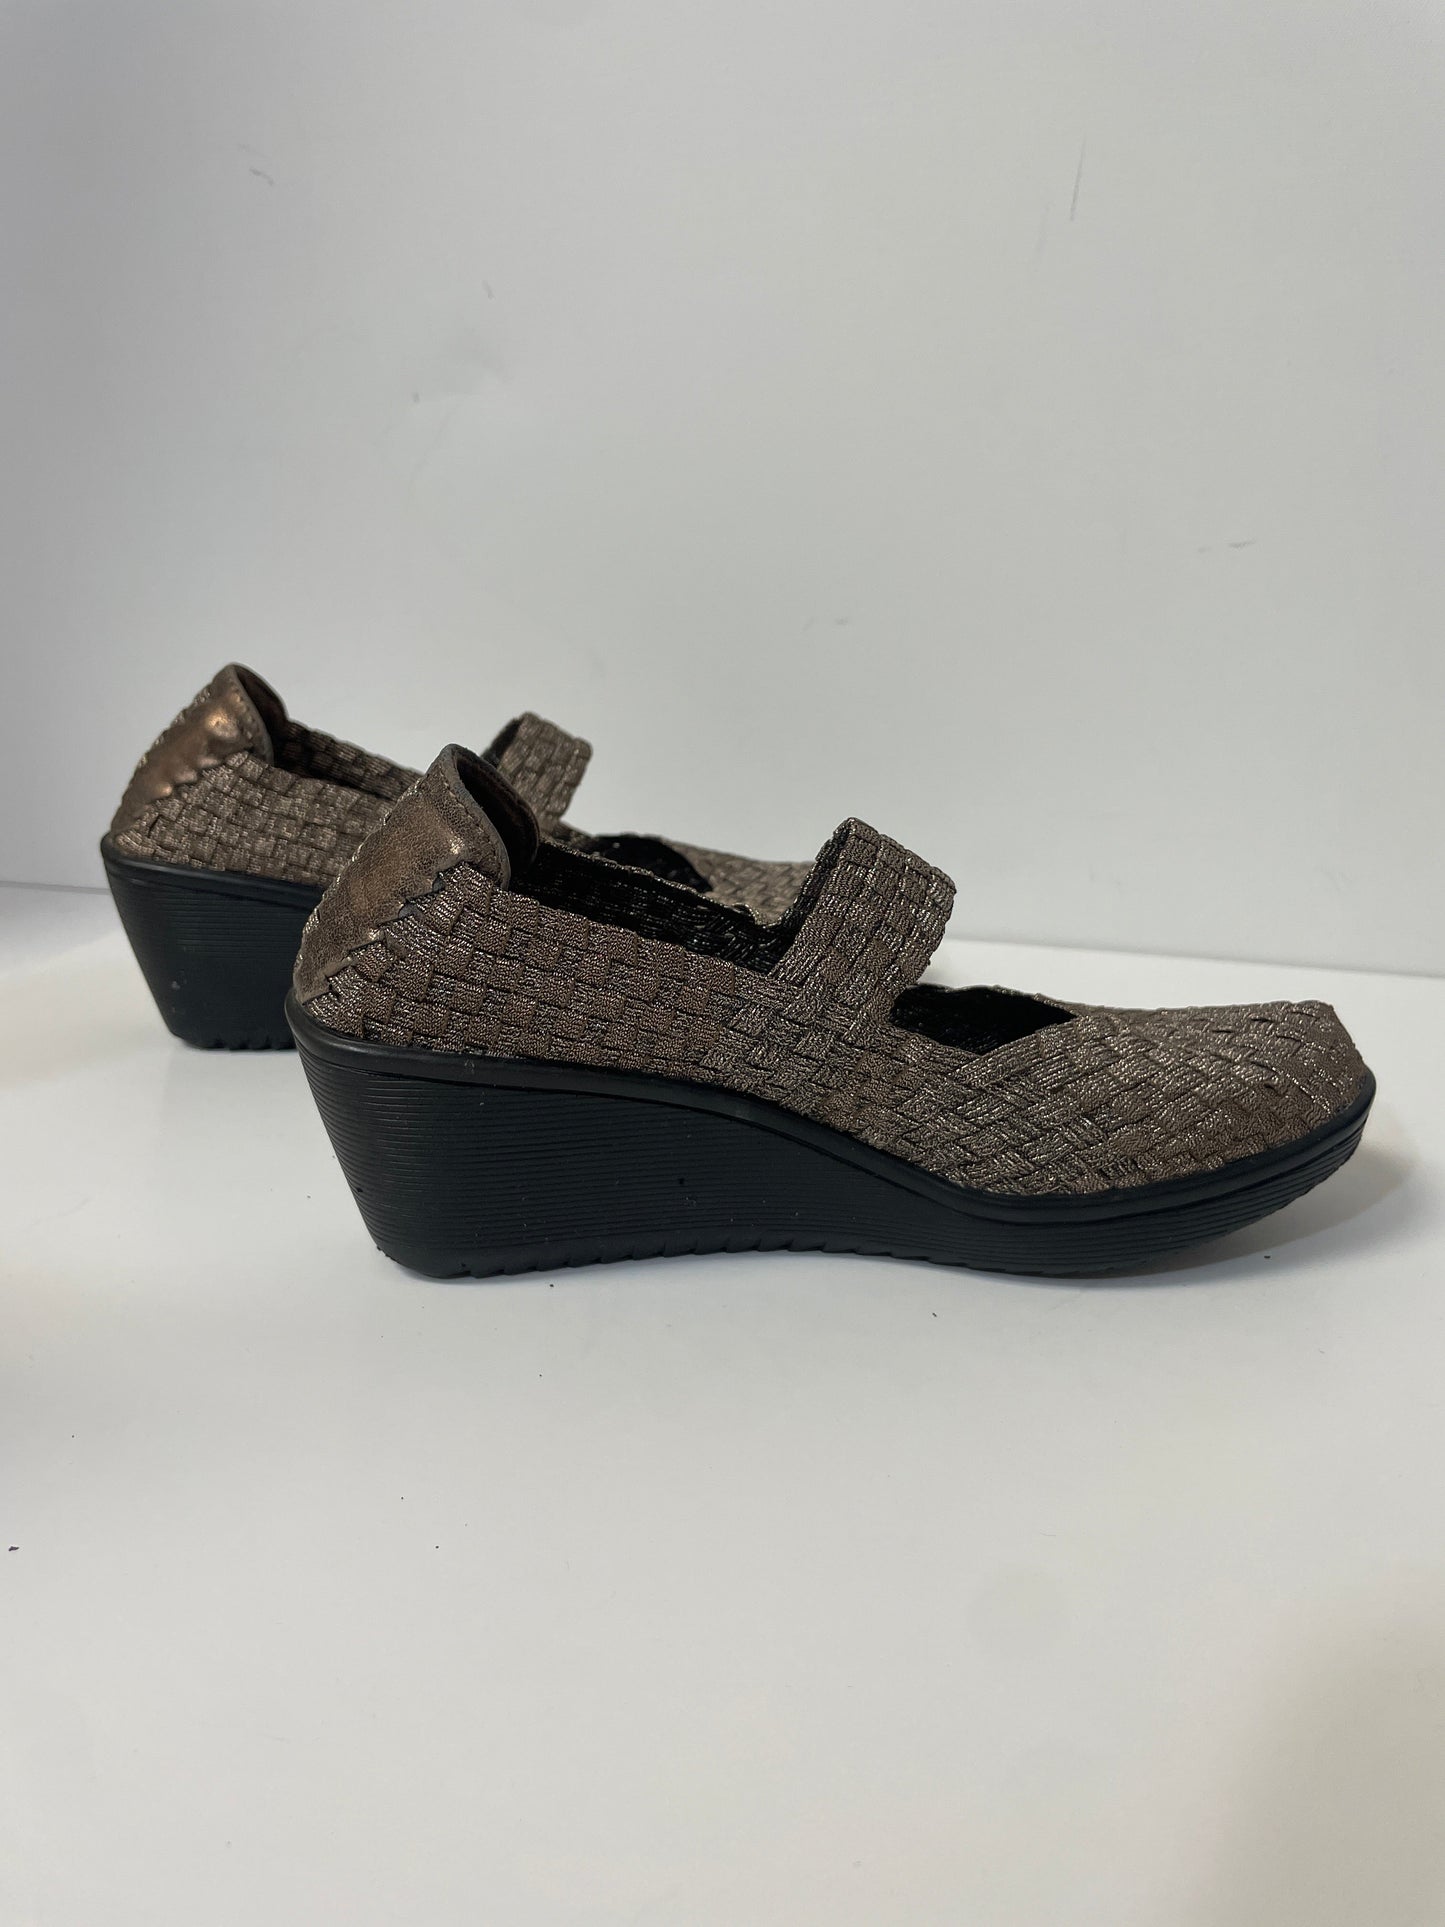 Shoes Heels Block By Bare Traps  Size: 6